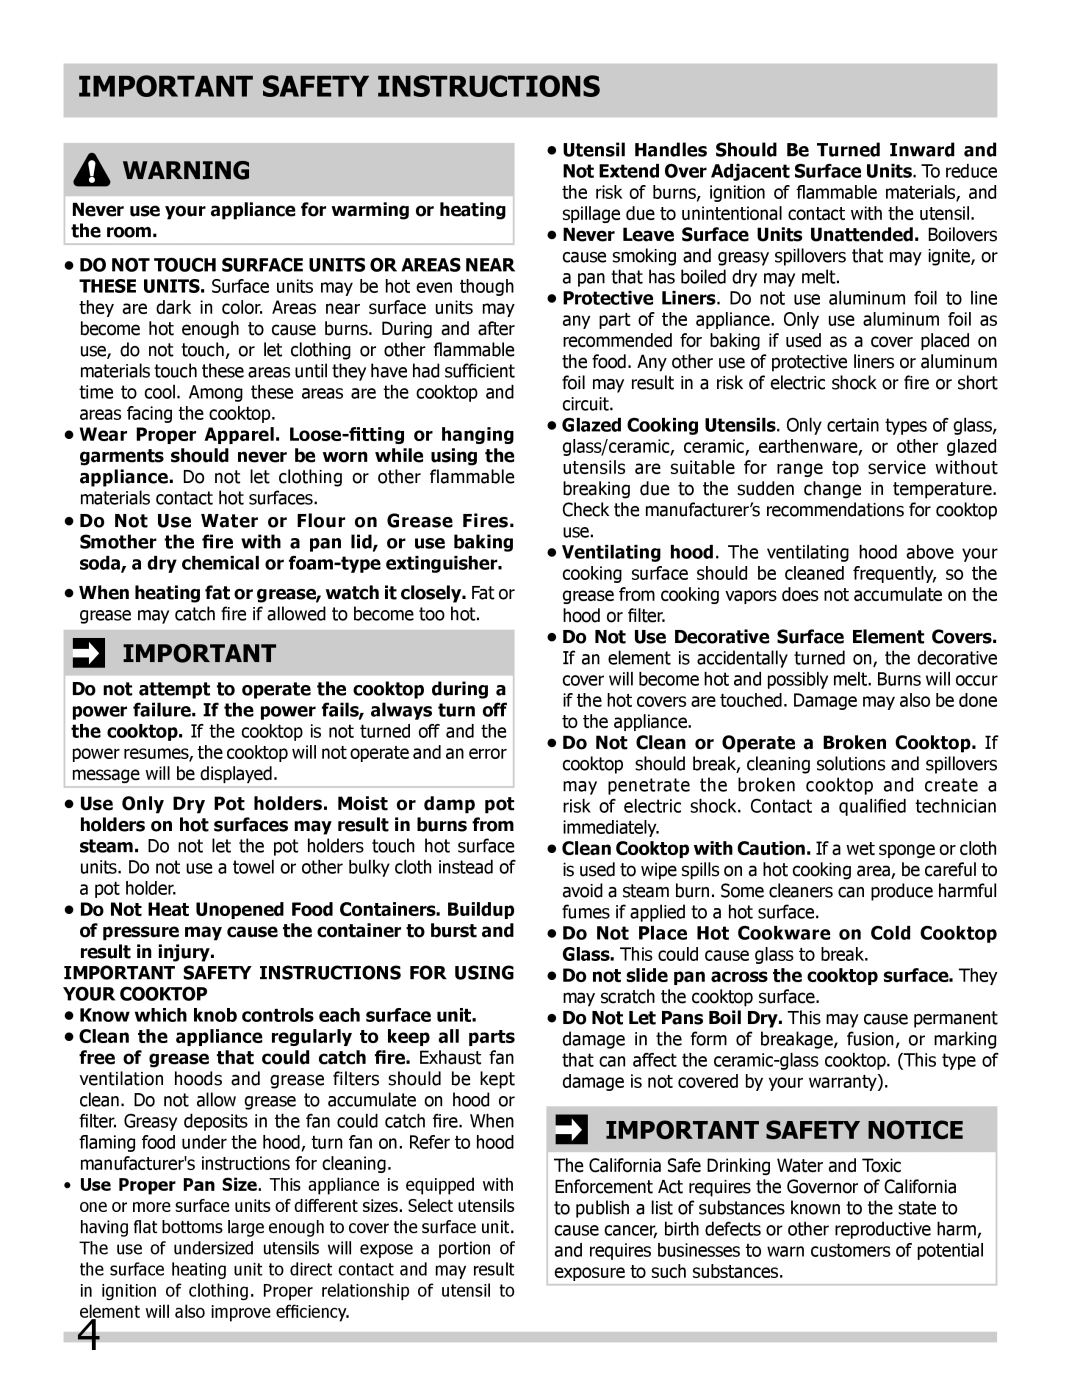 Frigidaire FGIC3667MB, FGIC3067MB, FPIC3095MS, FPIC3695MS Important Safety Notice, Important Safety Instructions 